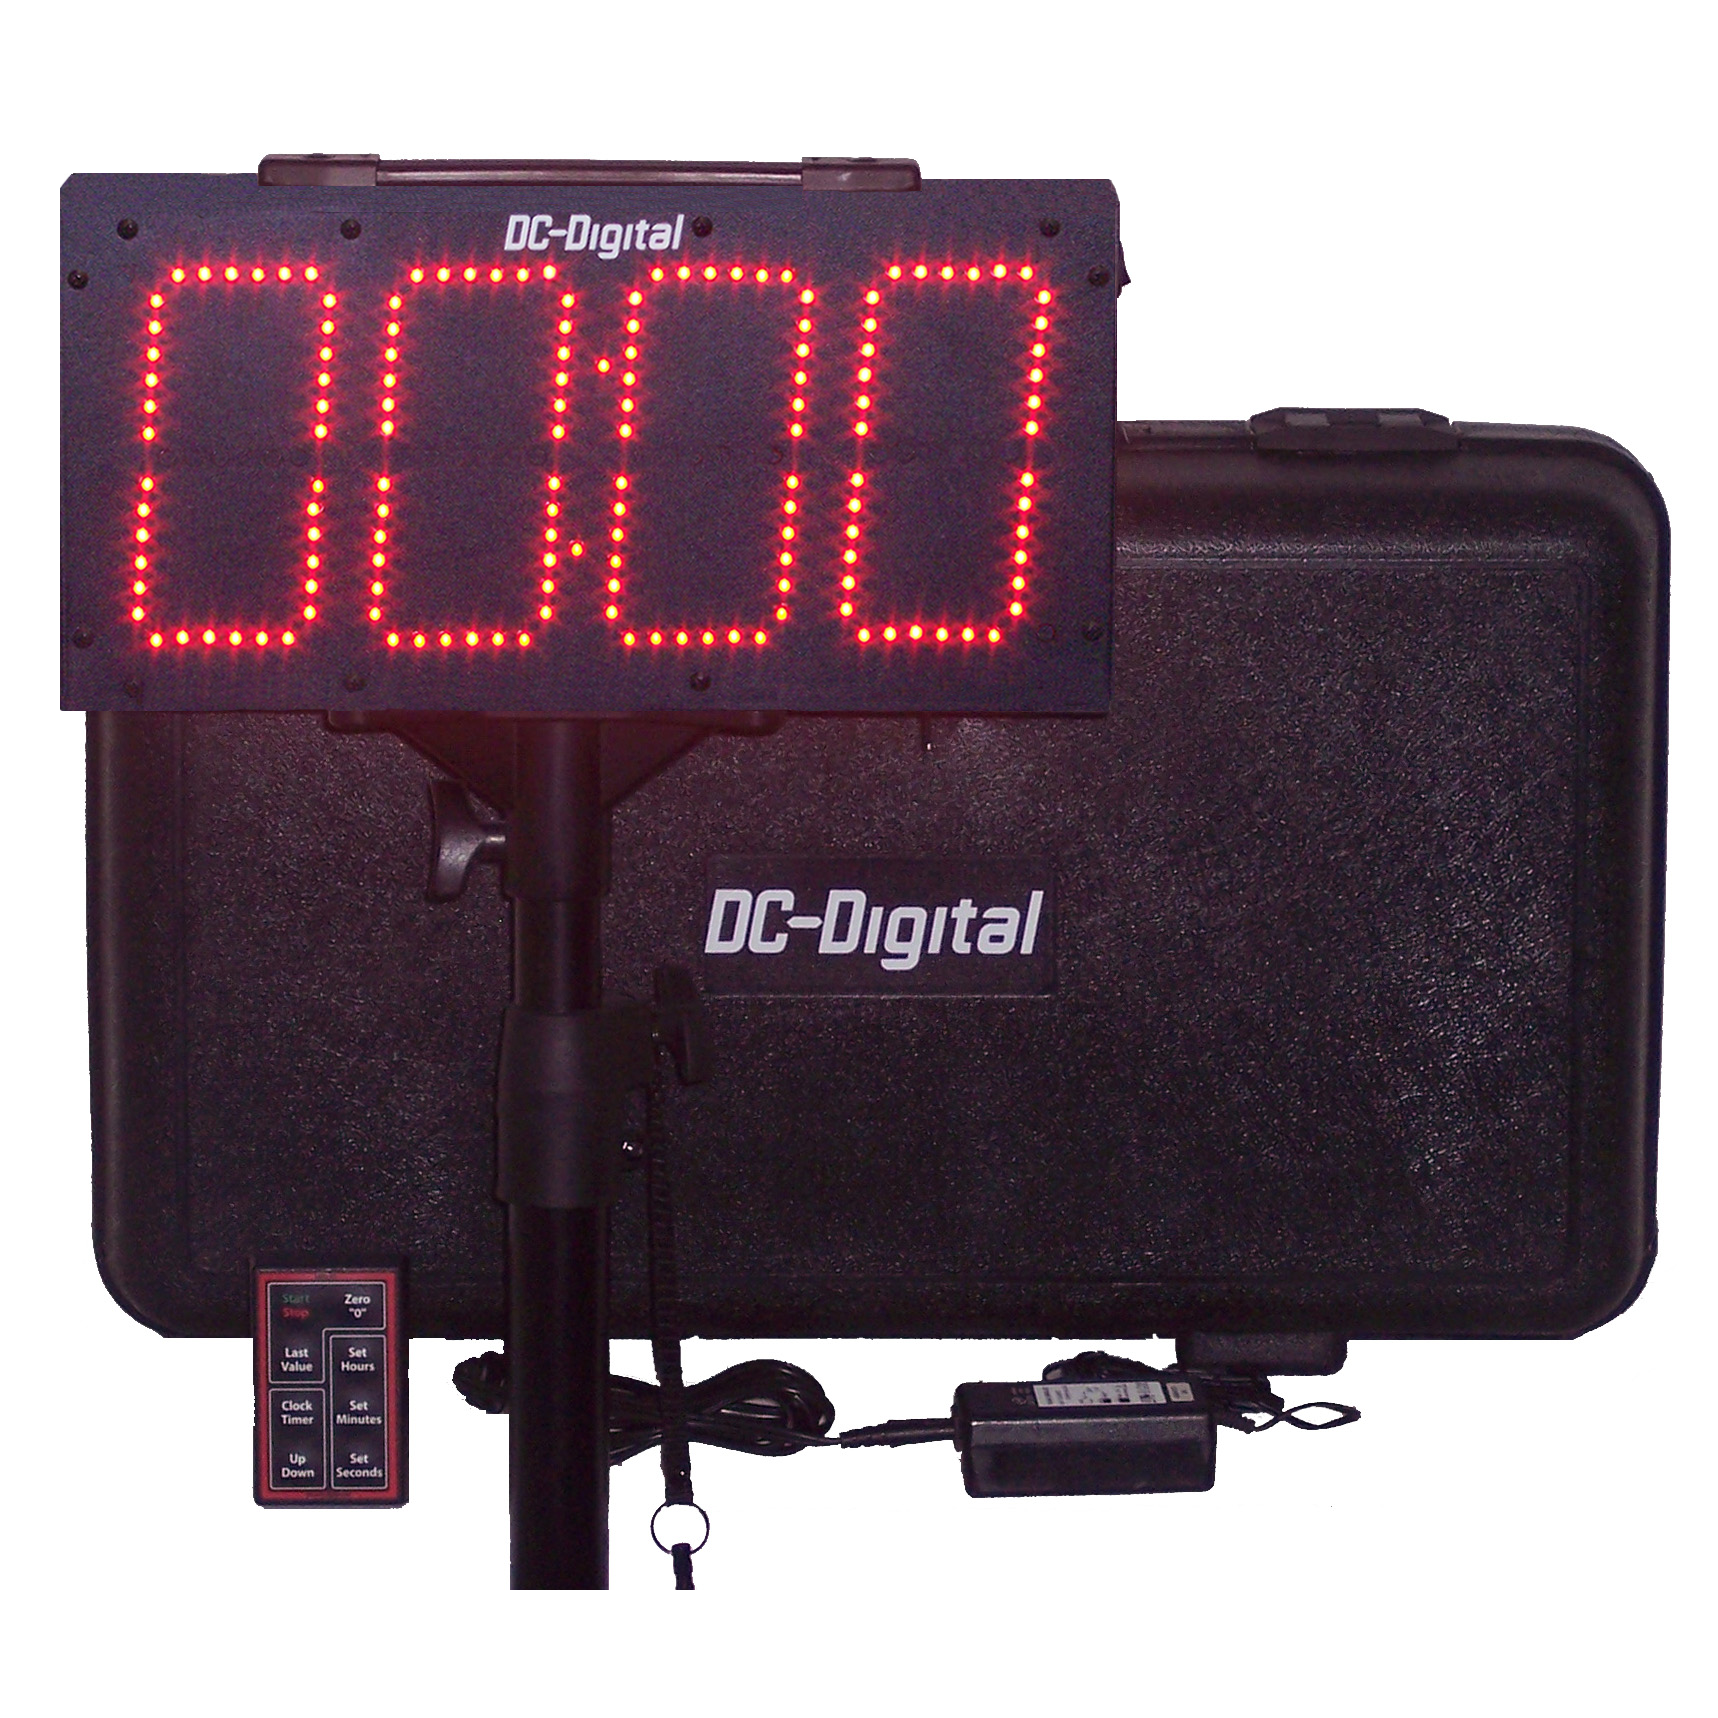 (DC-60UTW-BTC) Portable 6.0 Inch LED Digit, Multi-Function, Multipurpose Sport (Counts Up, Counts Down and Time of Day Clock), Battery Operated, Digital Timer-Clock with RF-Wireless Handheld Remote Controller, Carrying handle, Carrying Case, Tripod with Mount and Battery Charger (INDOOR/OUTDOOR)